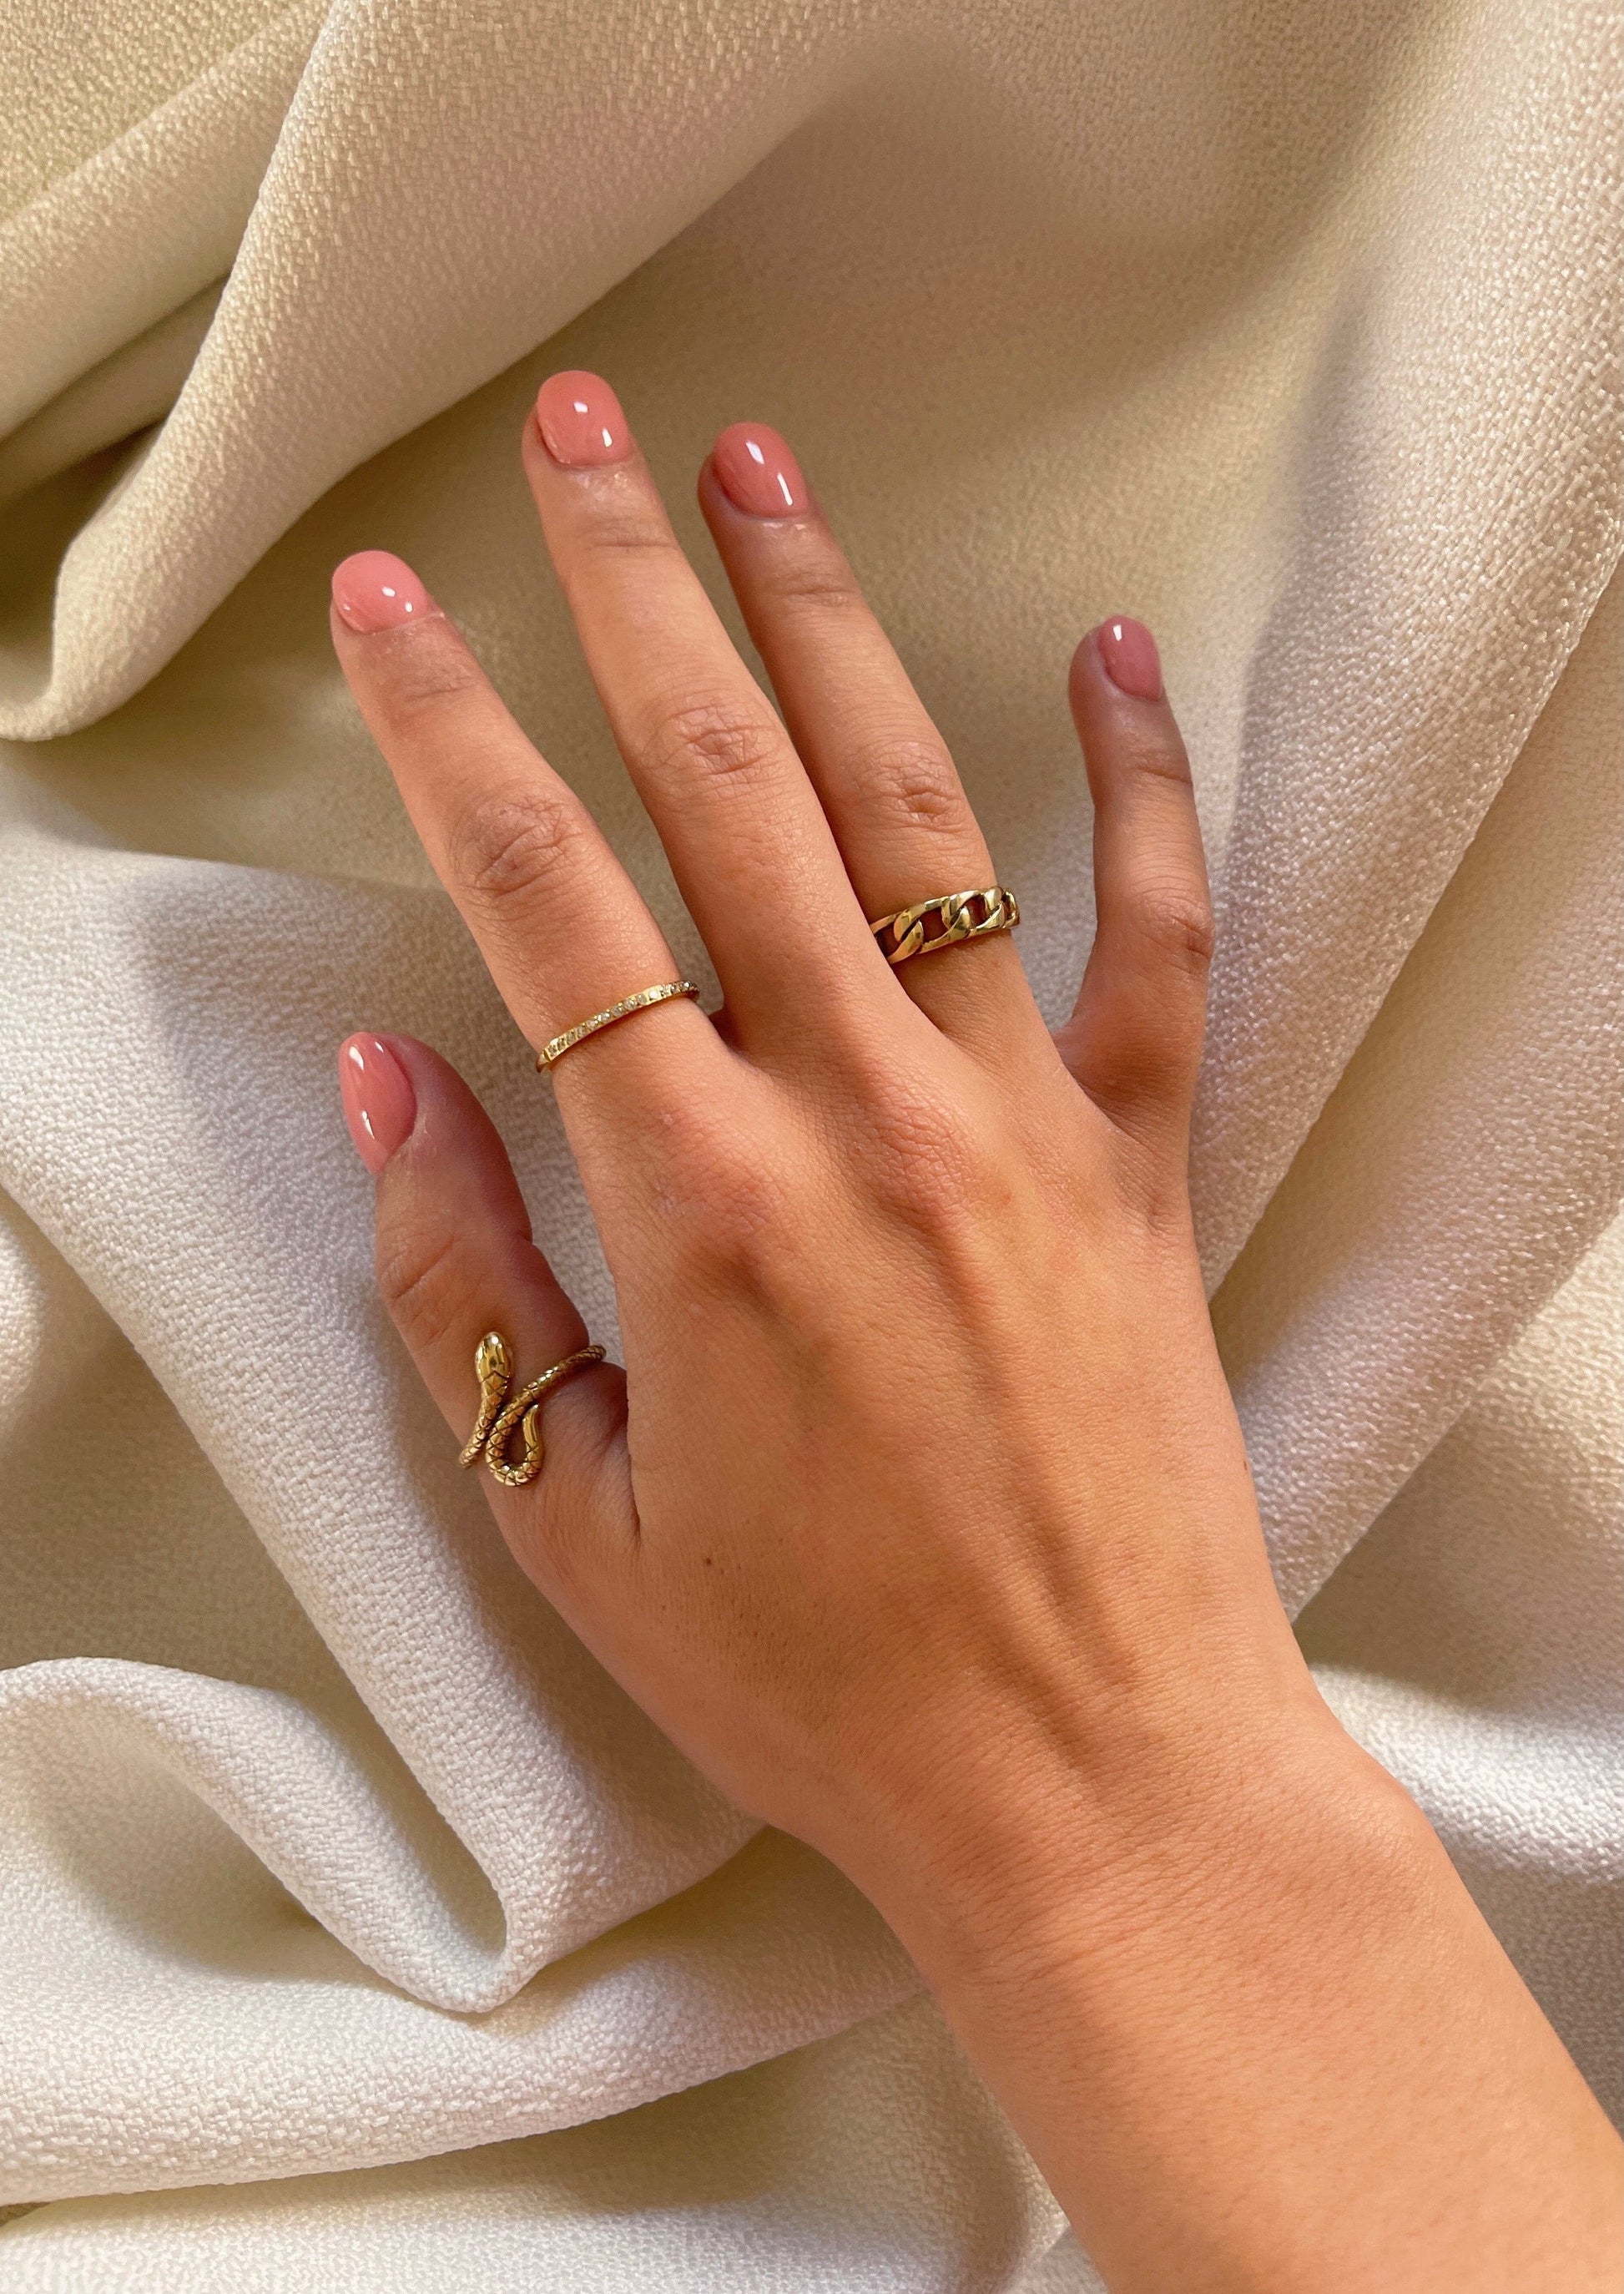 Gold ring Lil Snake Ring - 18k gold ring, serpent ring, snake ring, dainty ring, wrap ring, gold snake ring, gift for her, reptile